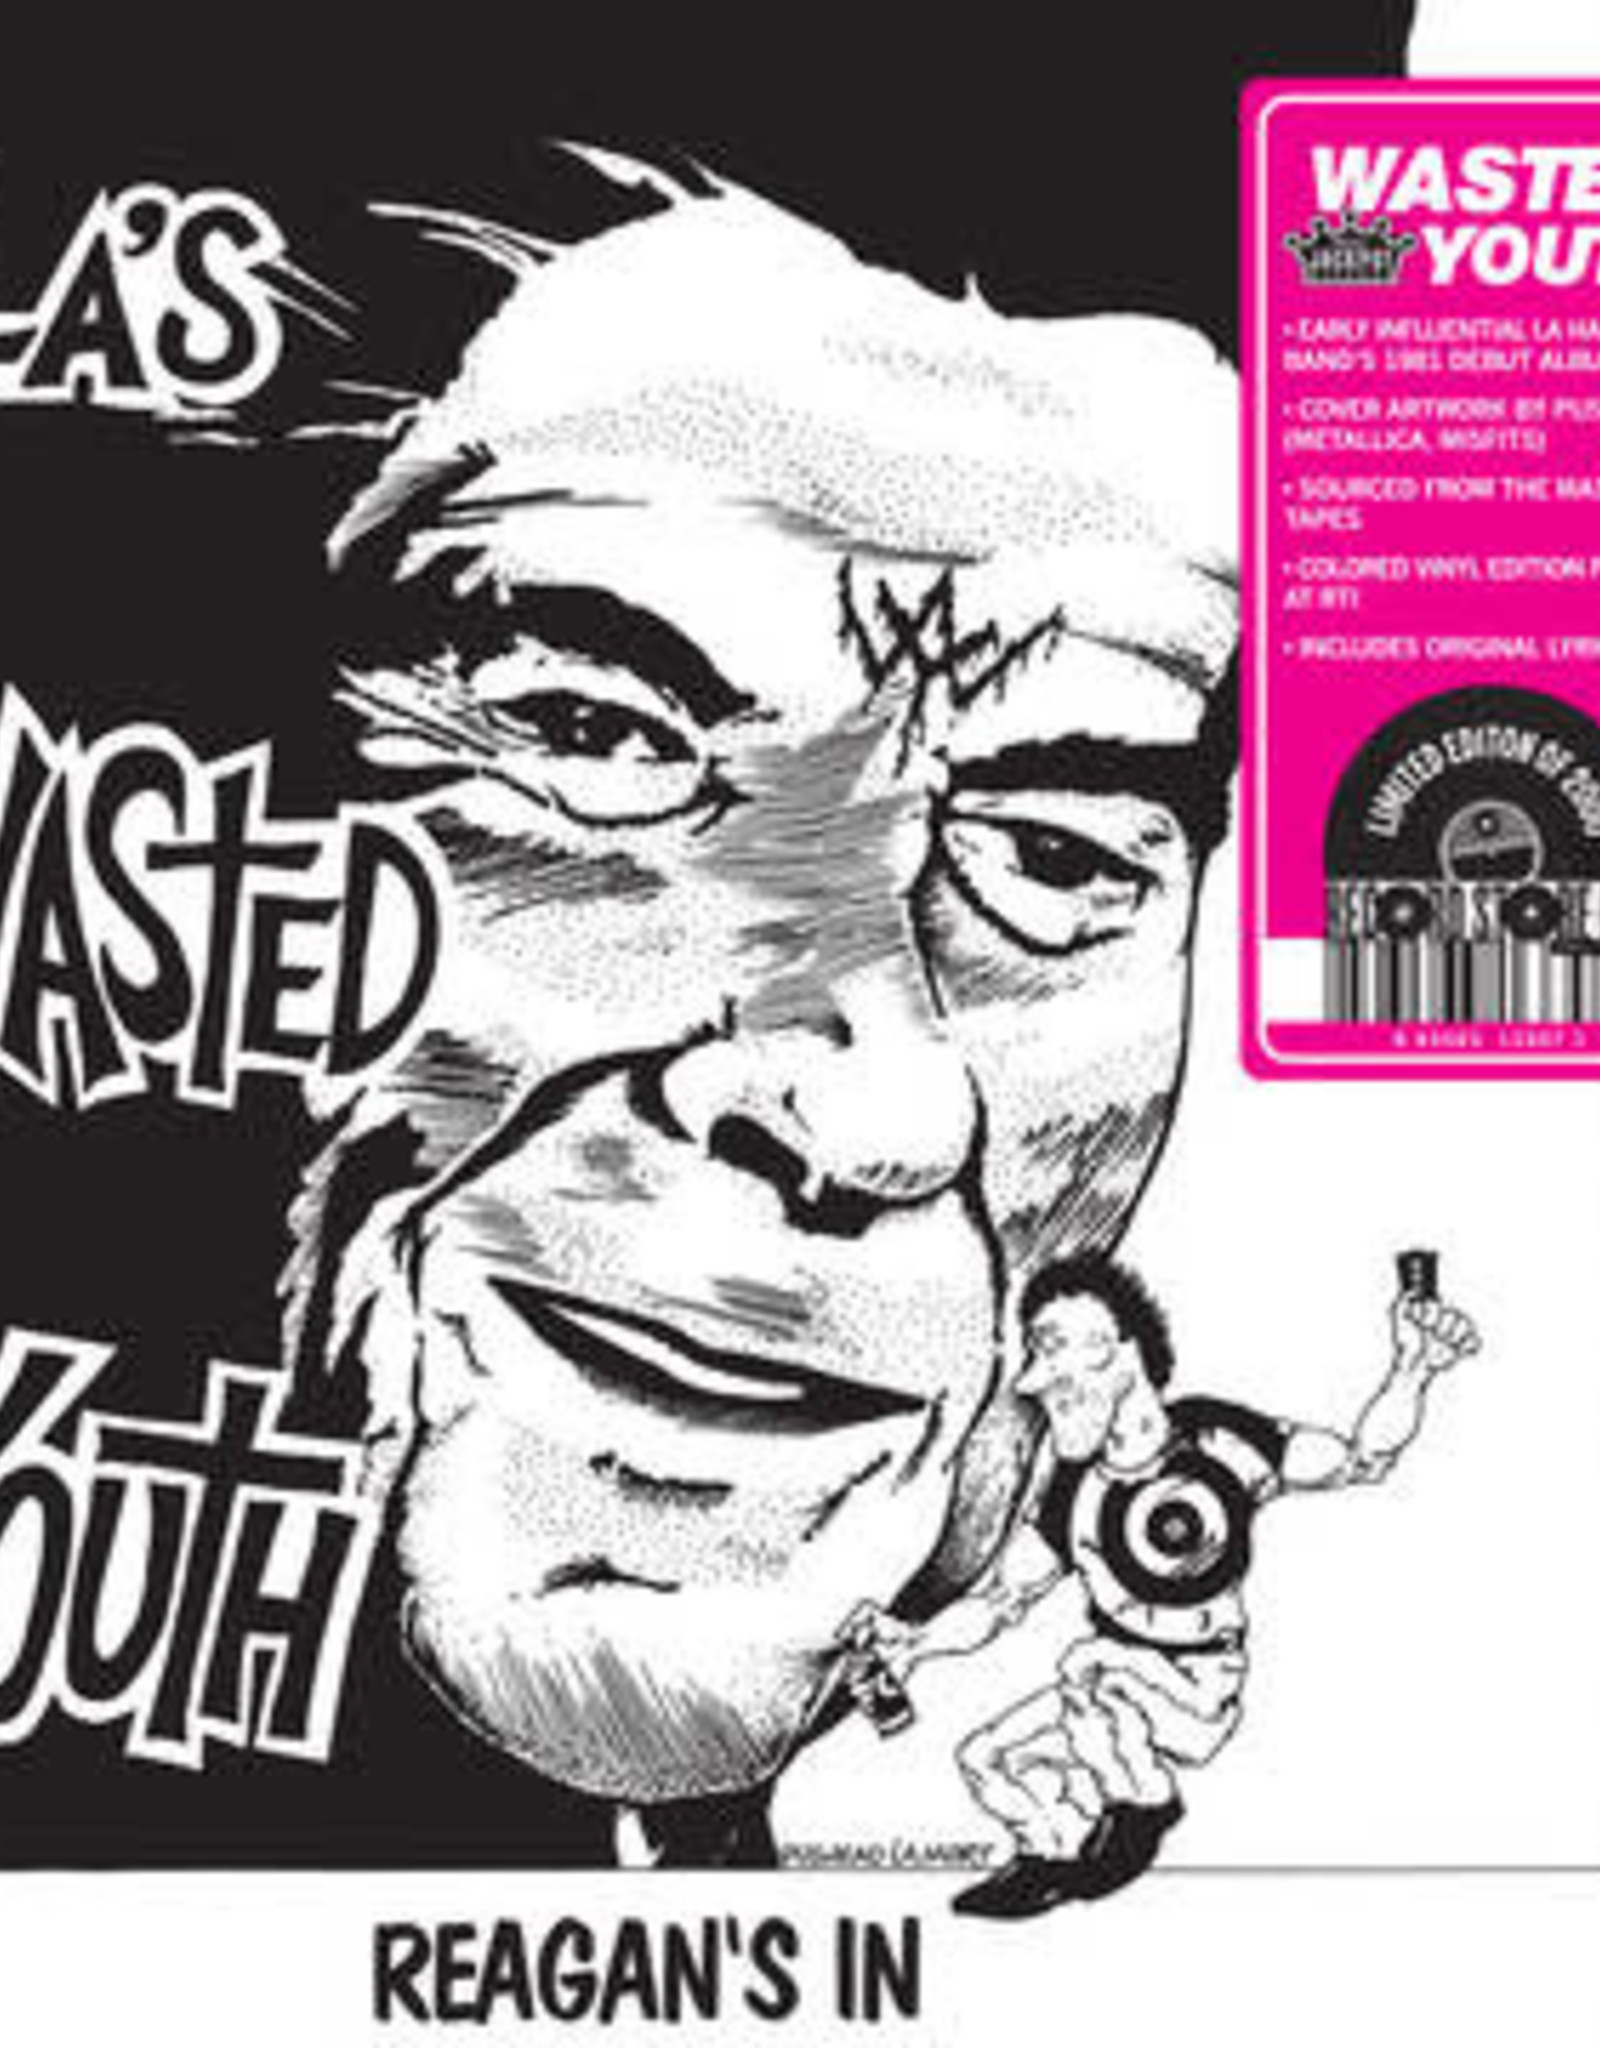 Wasted Youth - Reagan's In (Color Vinyl) (RSD 6/21)